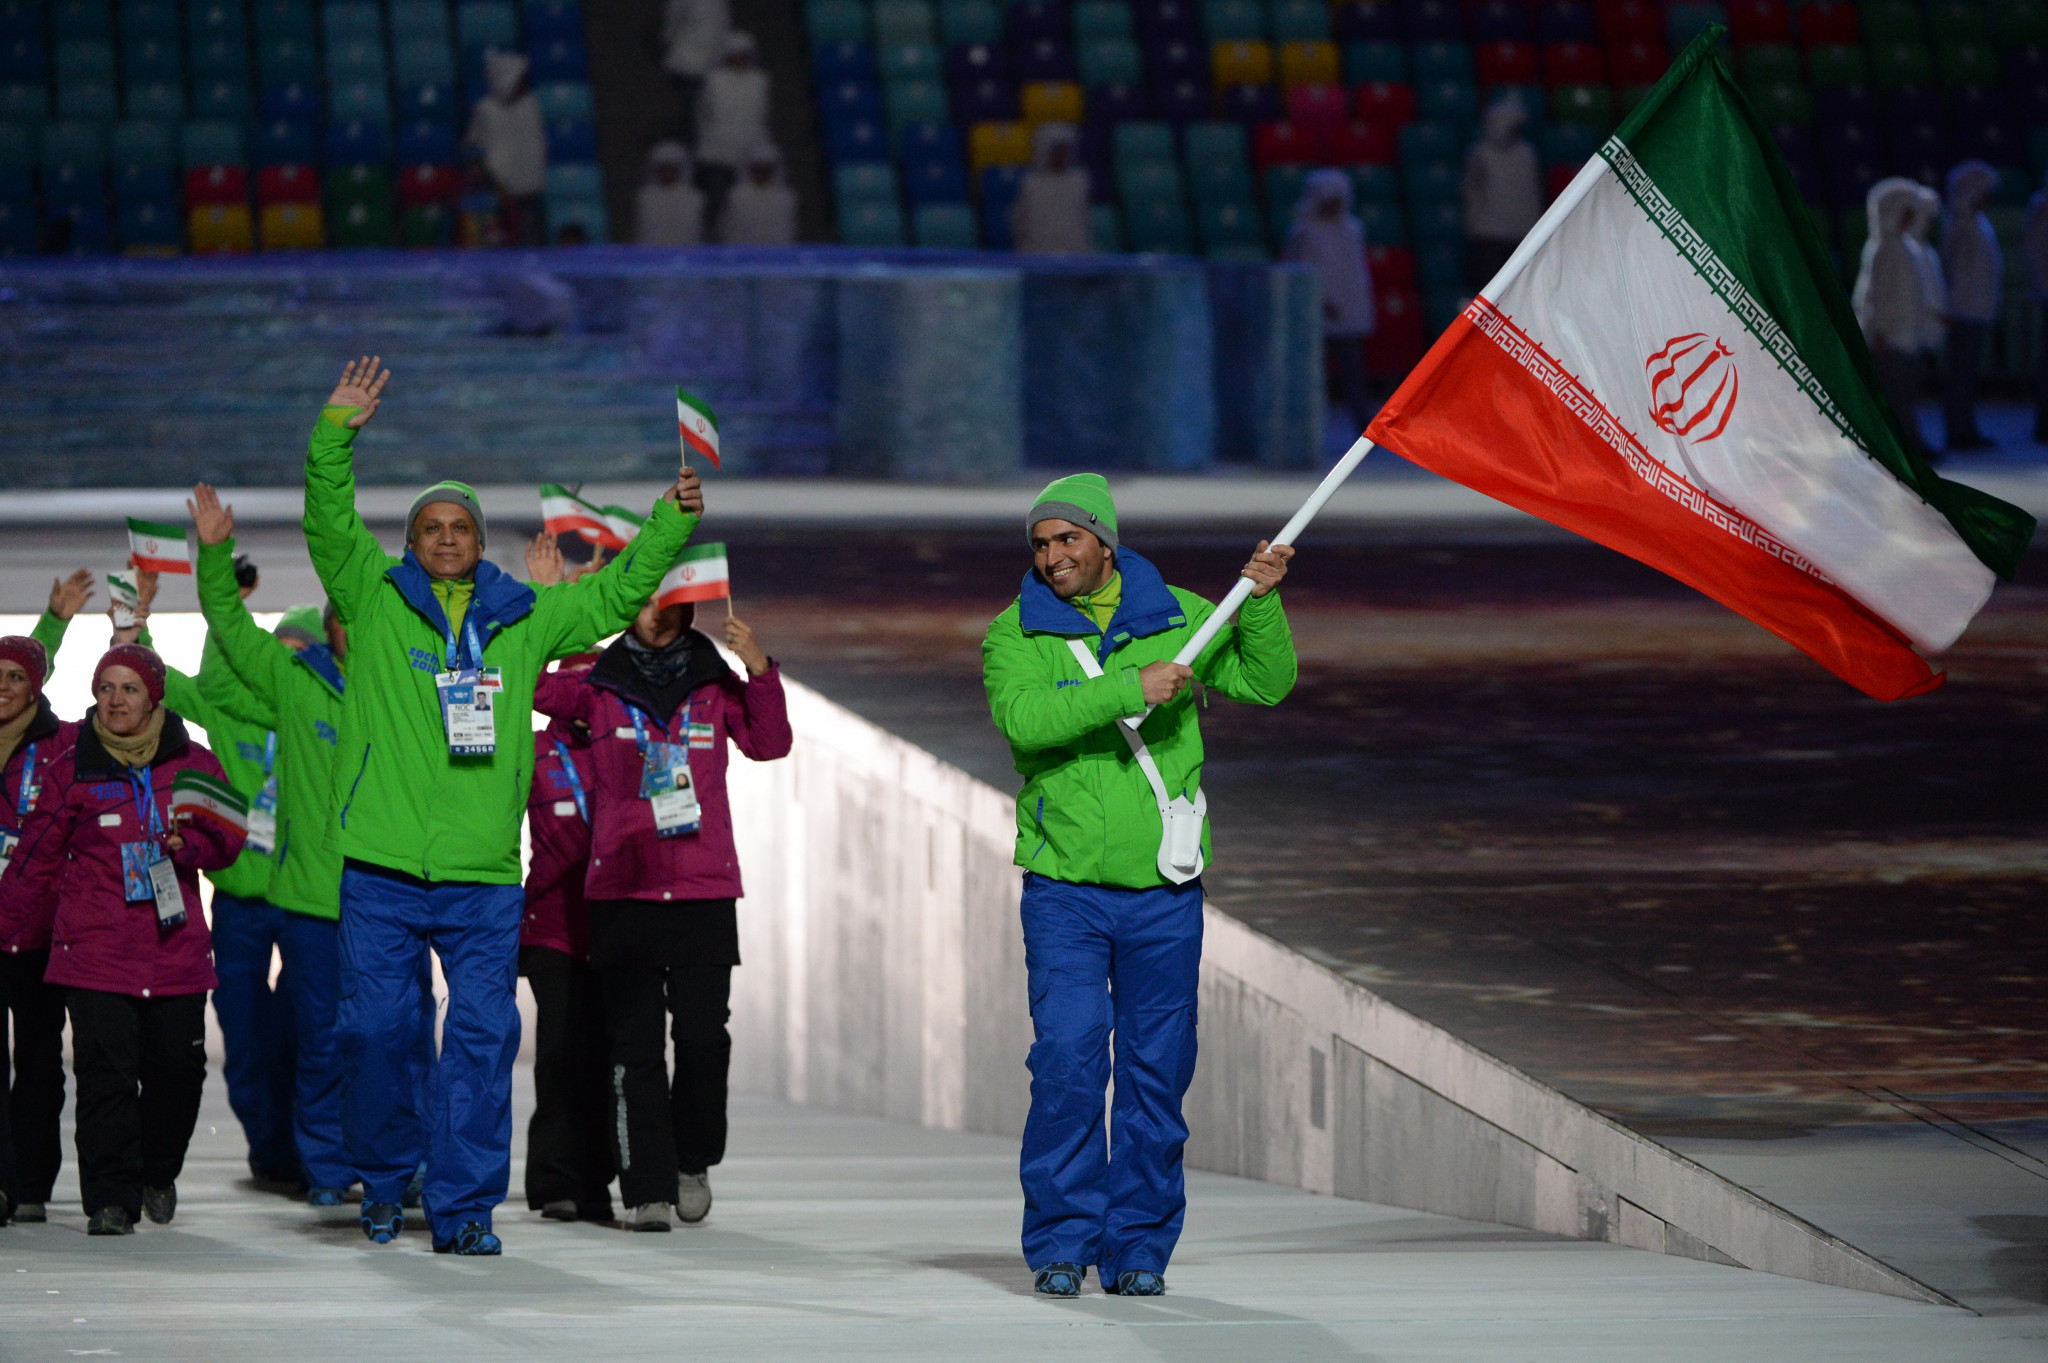 Hossein Saveh-Shemshaki, a member of Iran's team at Beijing 2022, had carried his country's flag during the Opening Ceremony fof the 2014 Winter Olympics in Sochi ©Getty Images